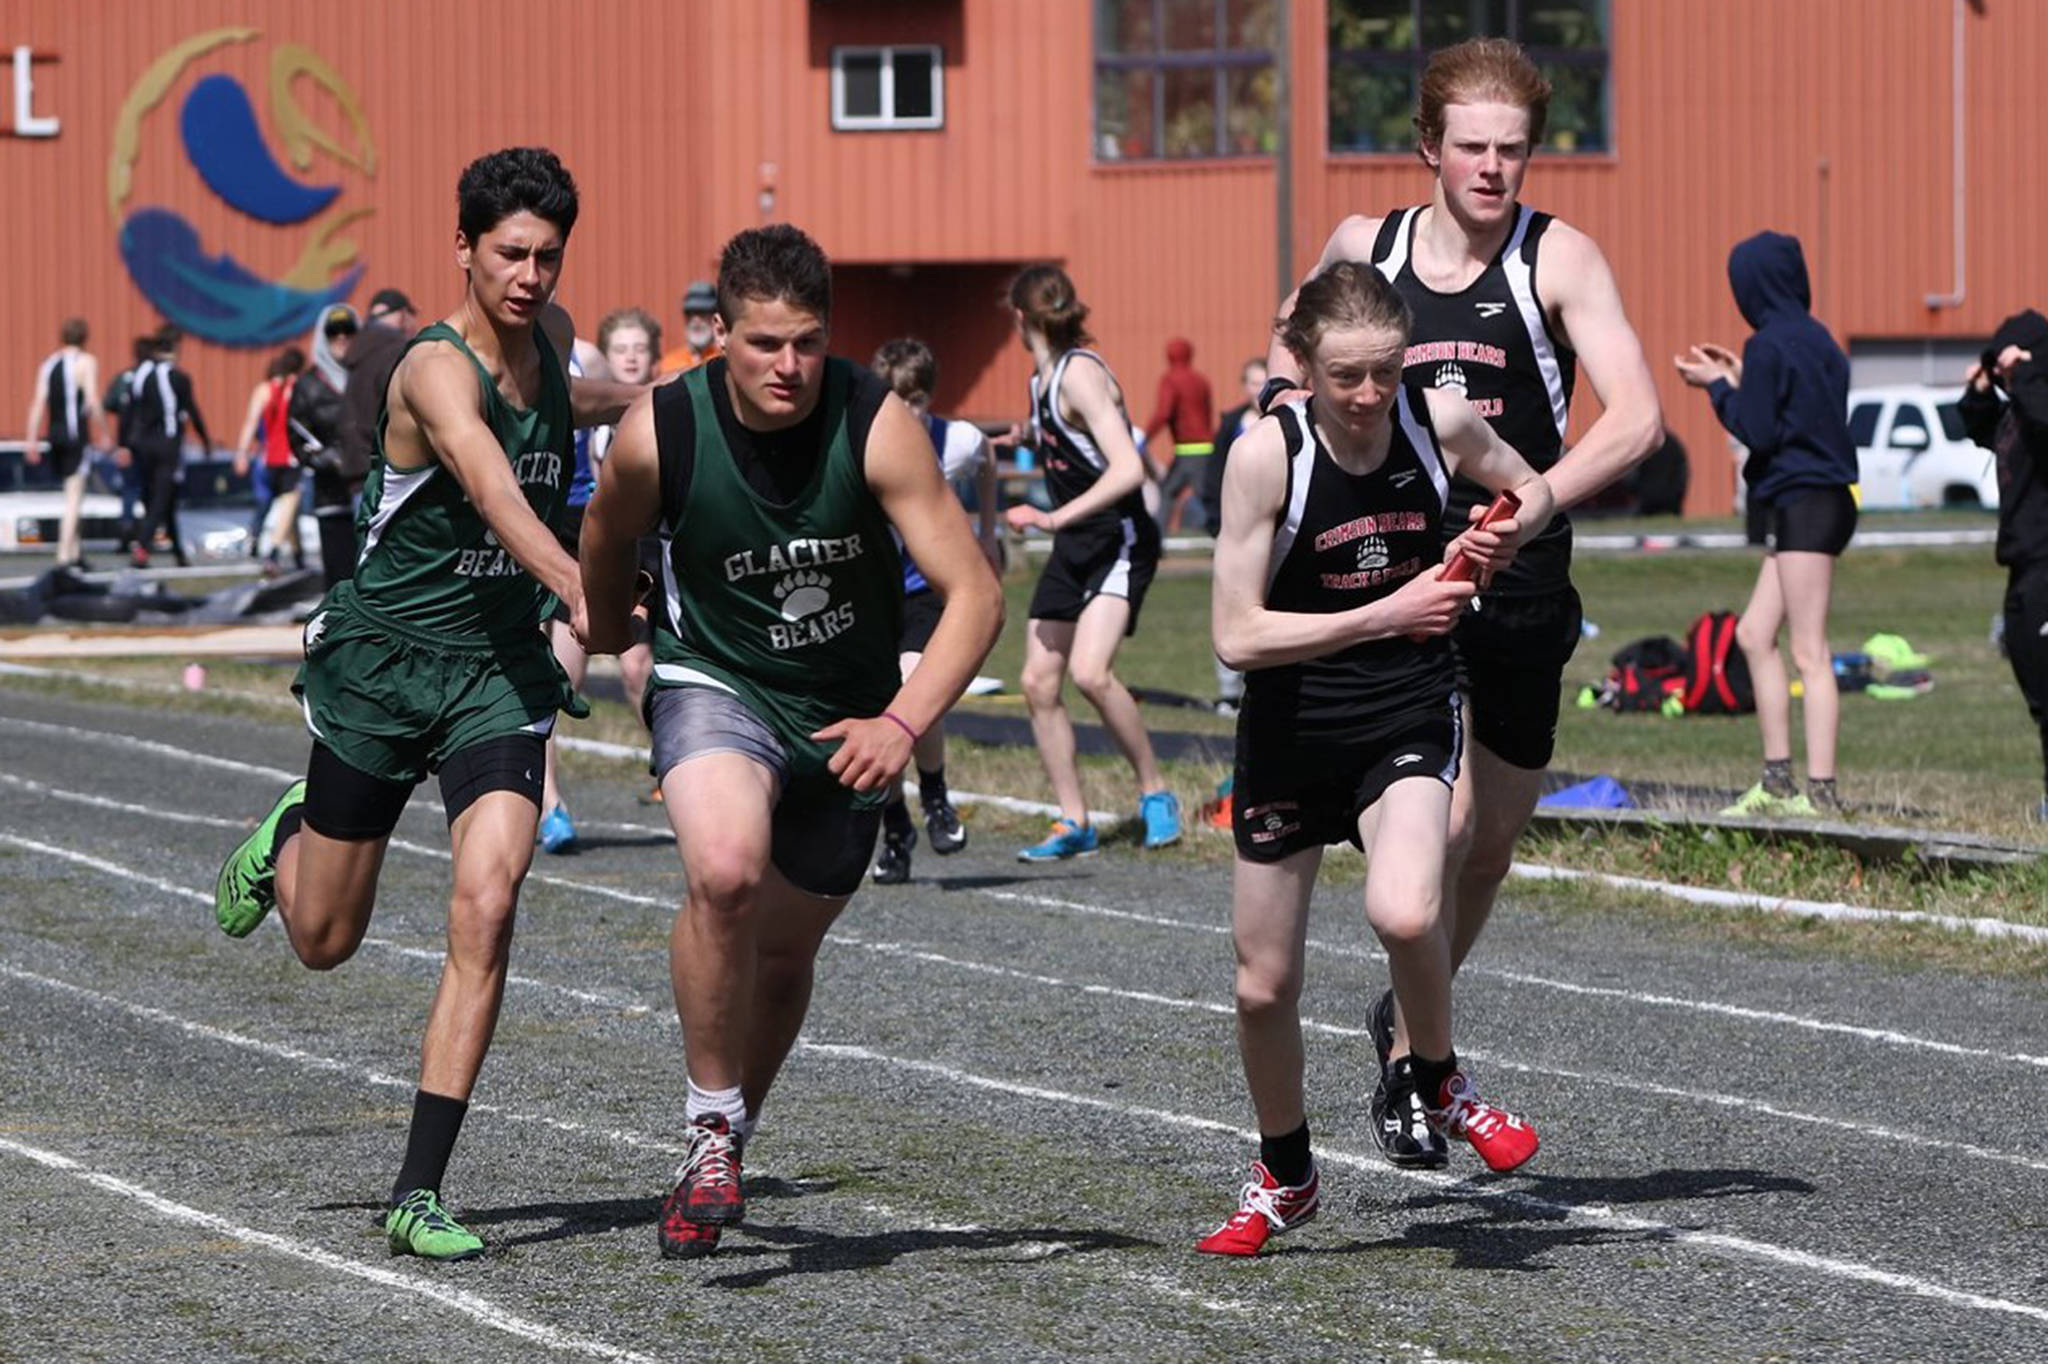 From pretenders to contenders: JDHS ready for Region V meet